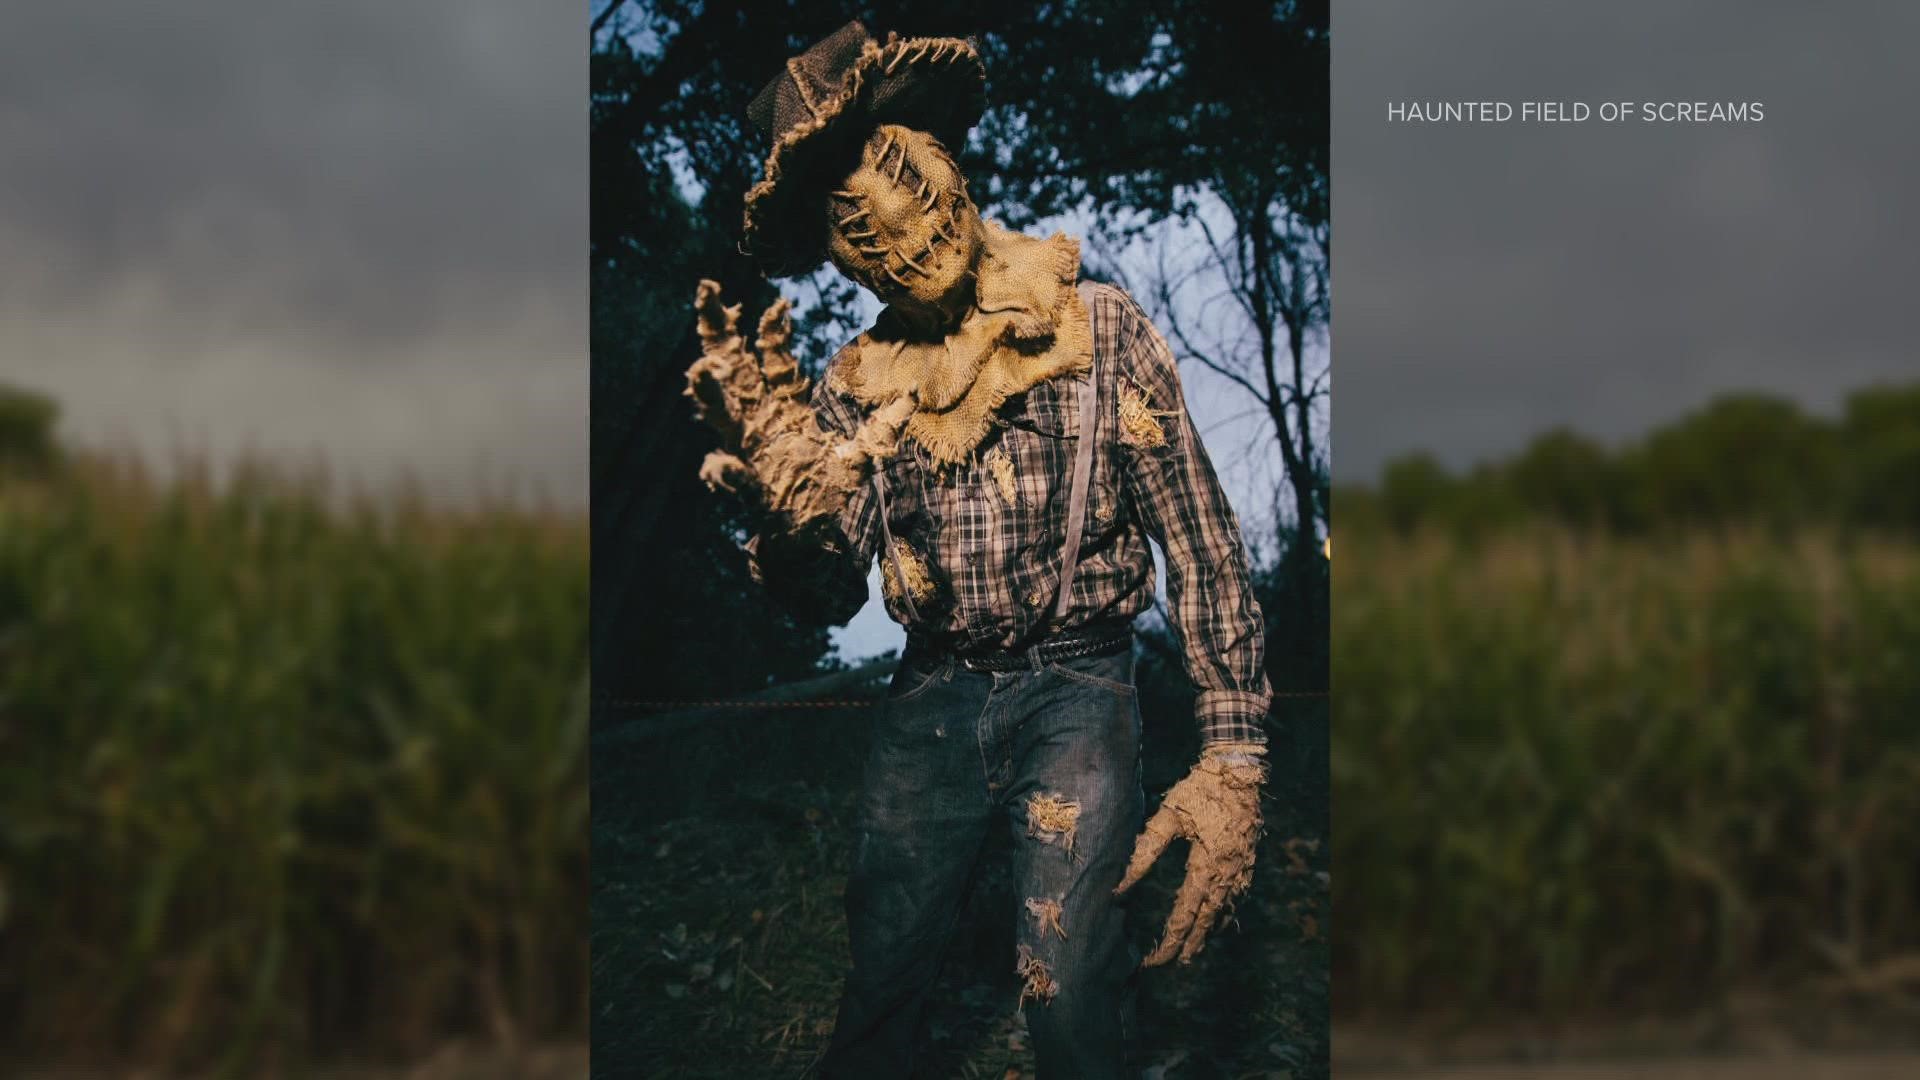 On Friday, September 30, the Haunted Field of Screams opens in Thornton. The attraction is built on a 40-acre corn field and is one of the largest in the state.